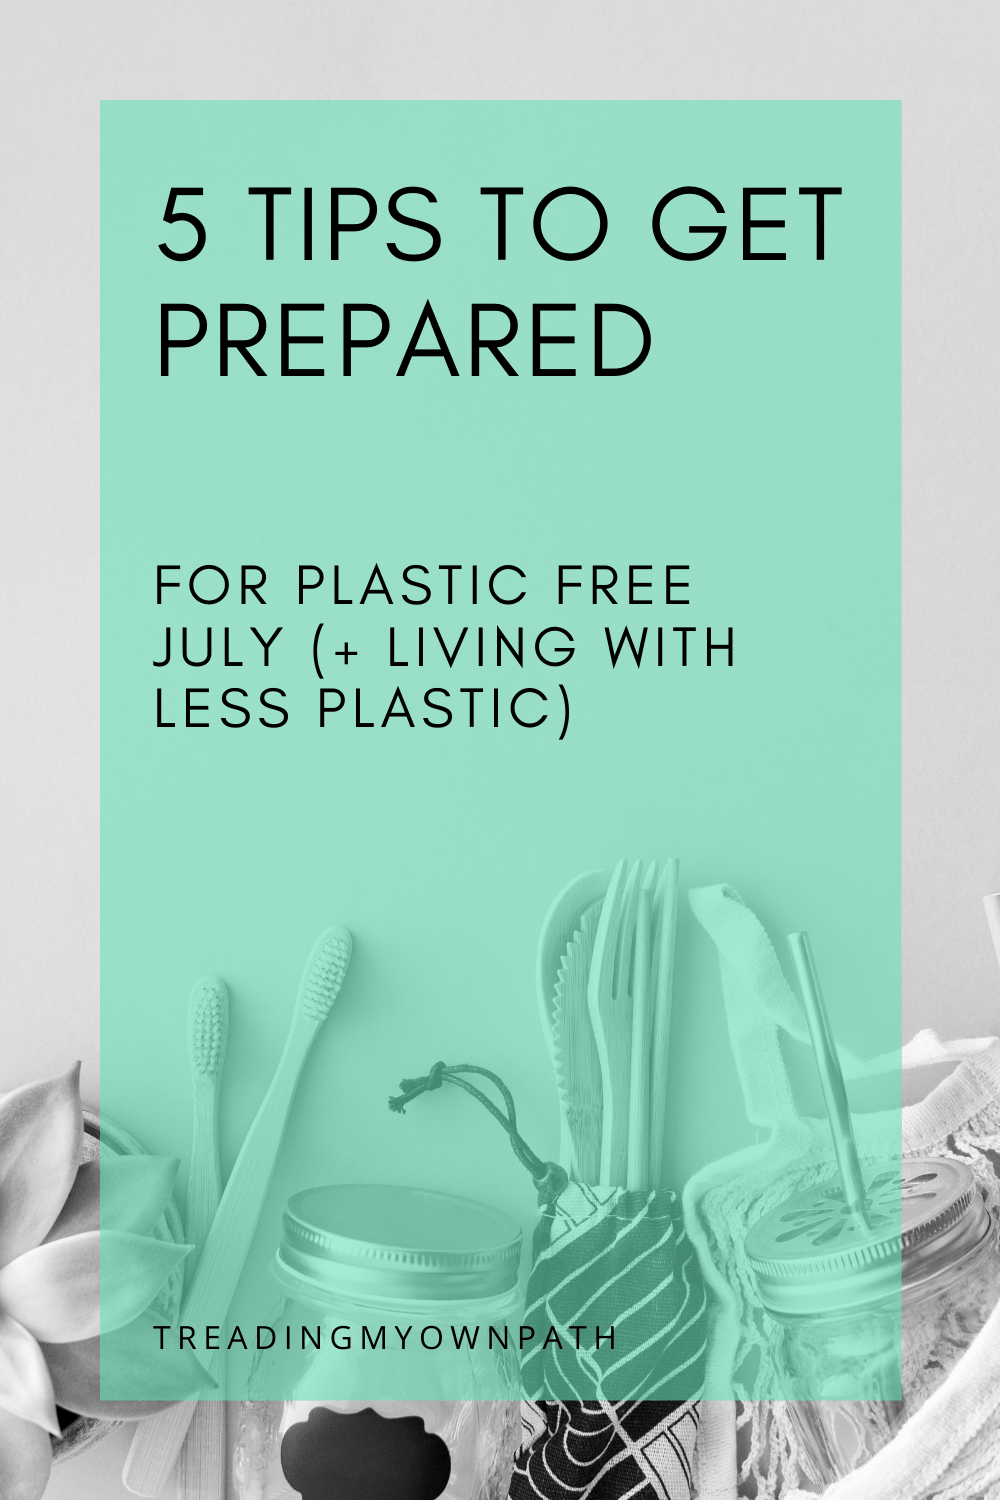 5 tips to get prepped for Plastic Free July (and living with less plastic)